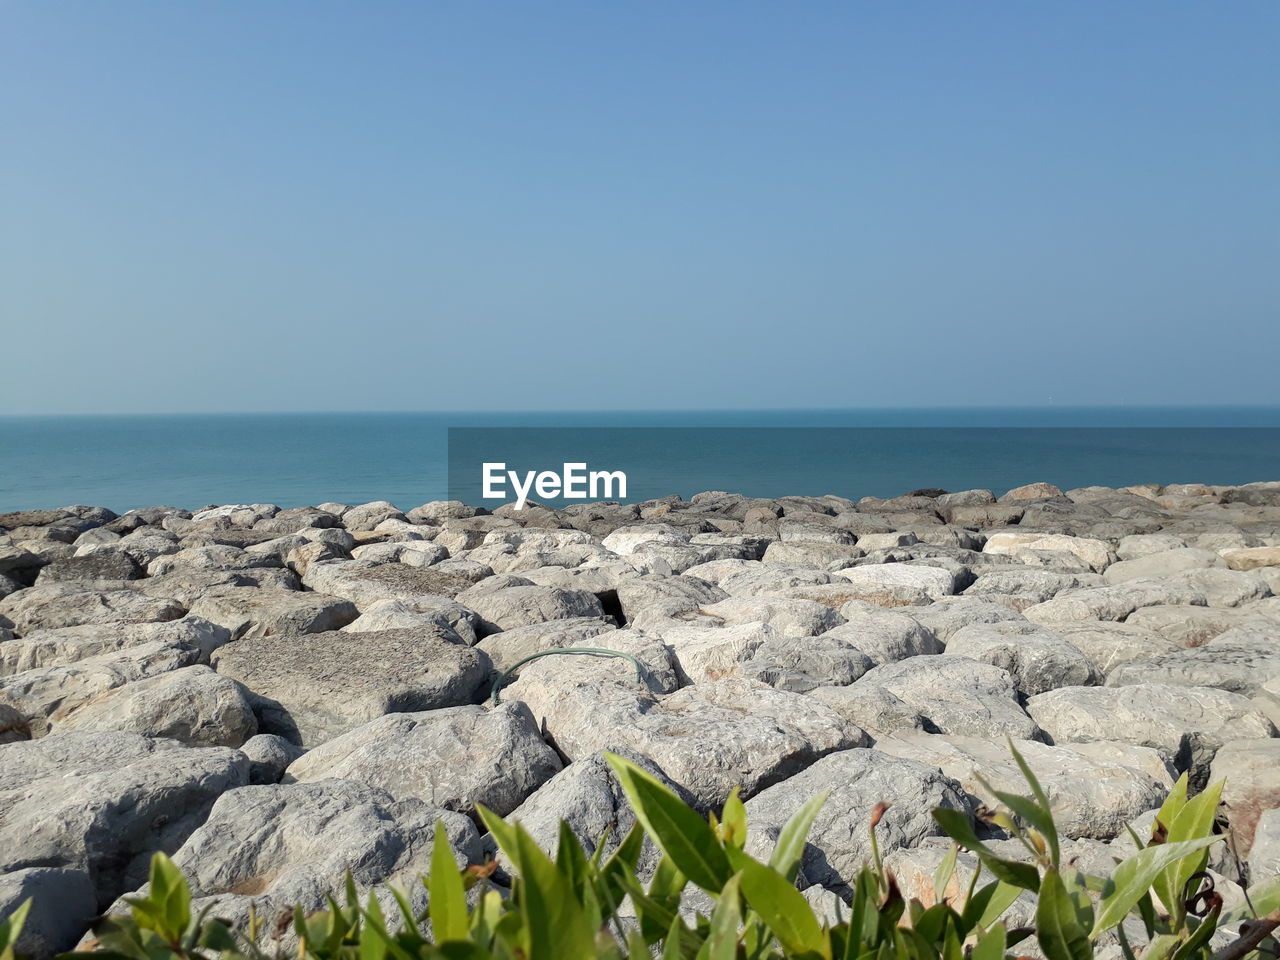 SCENIC VIEW OF SEA AGAINST CLEAR BLUE SKY